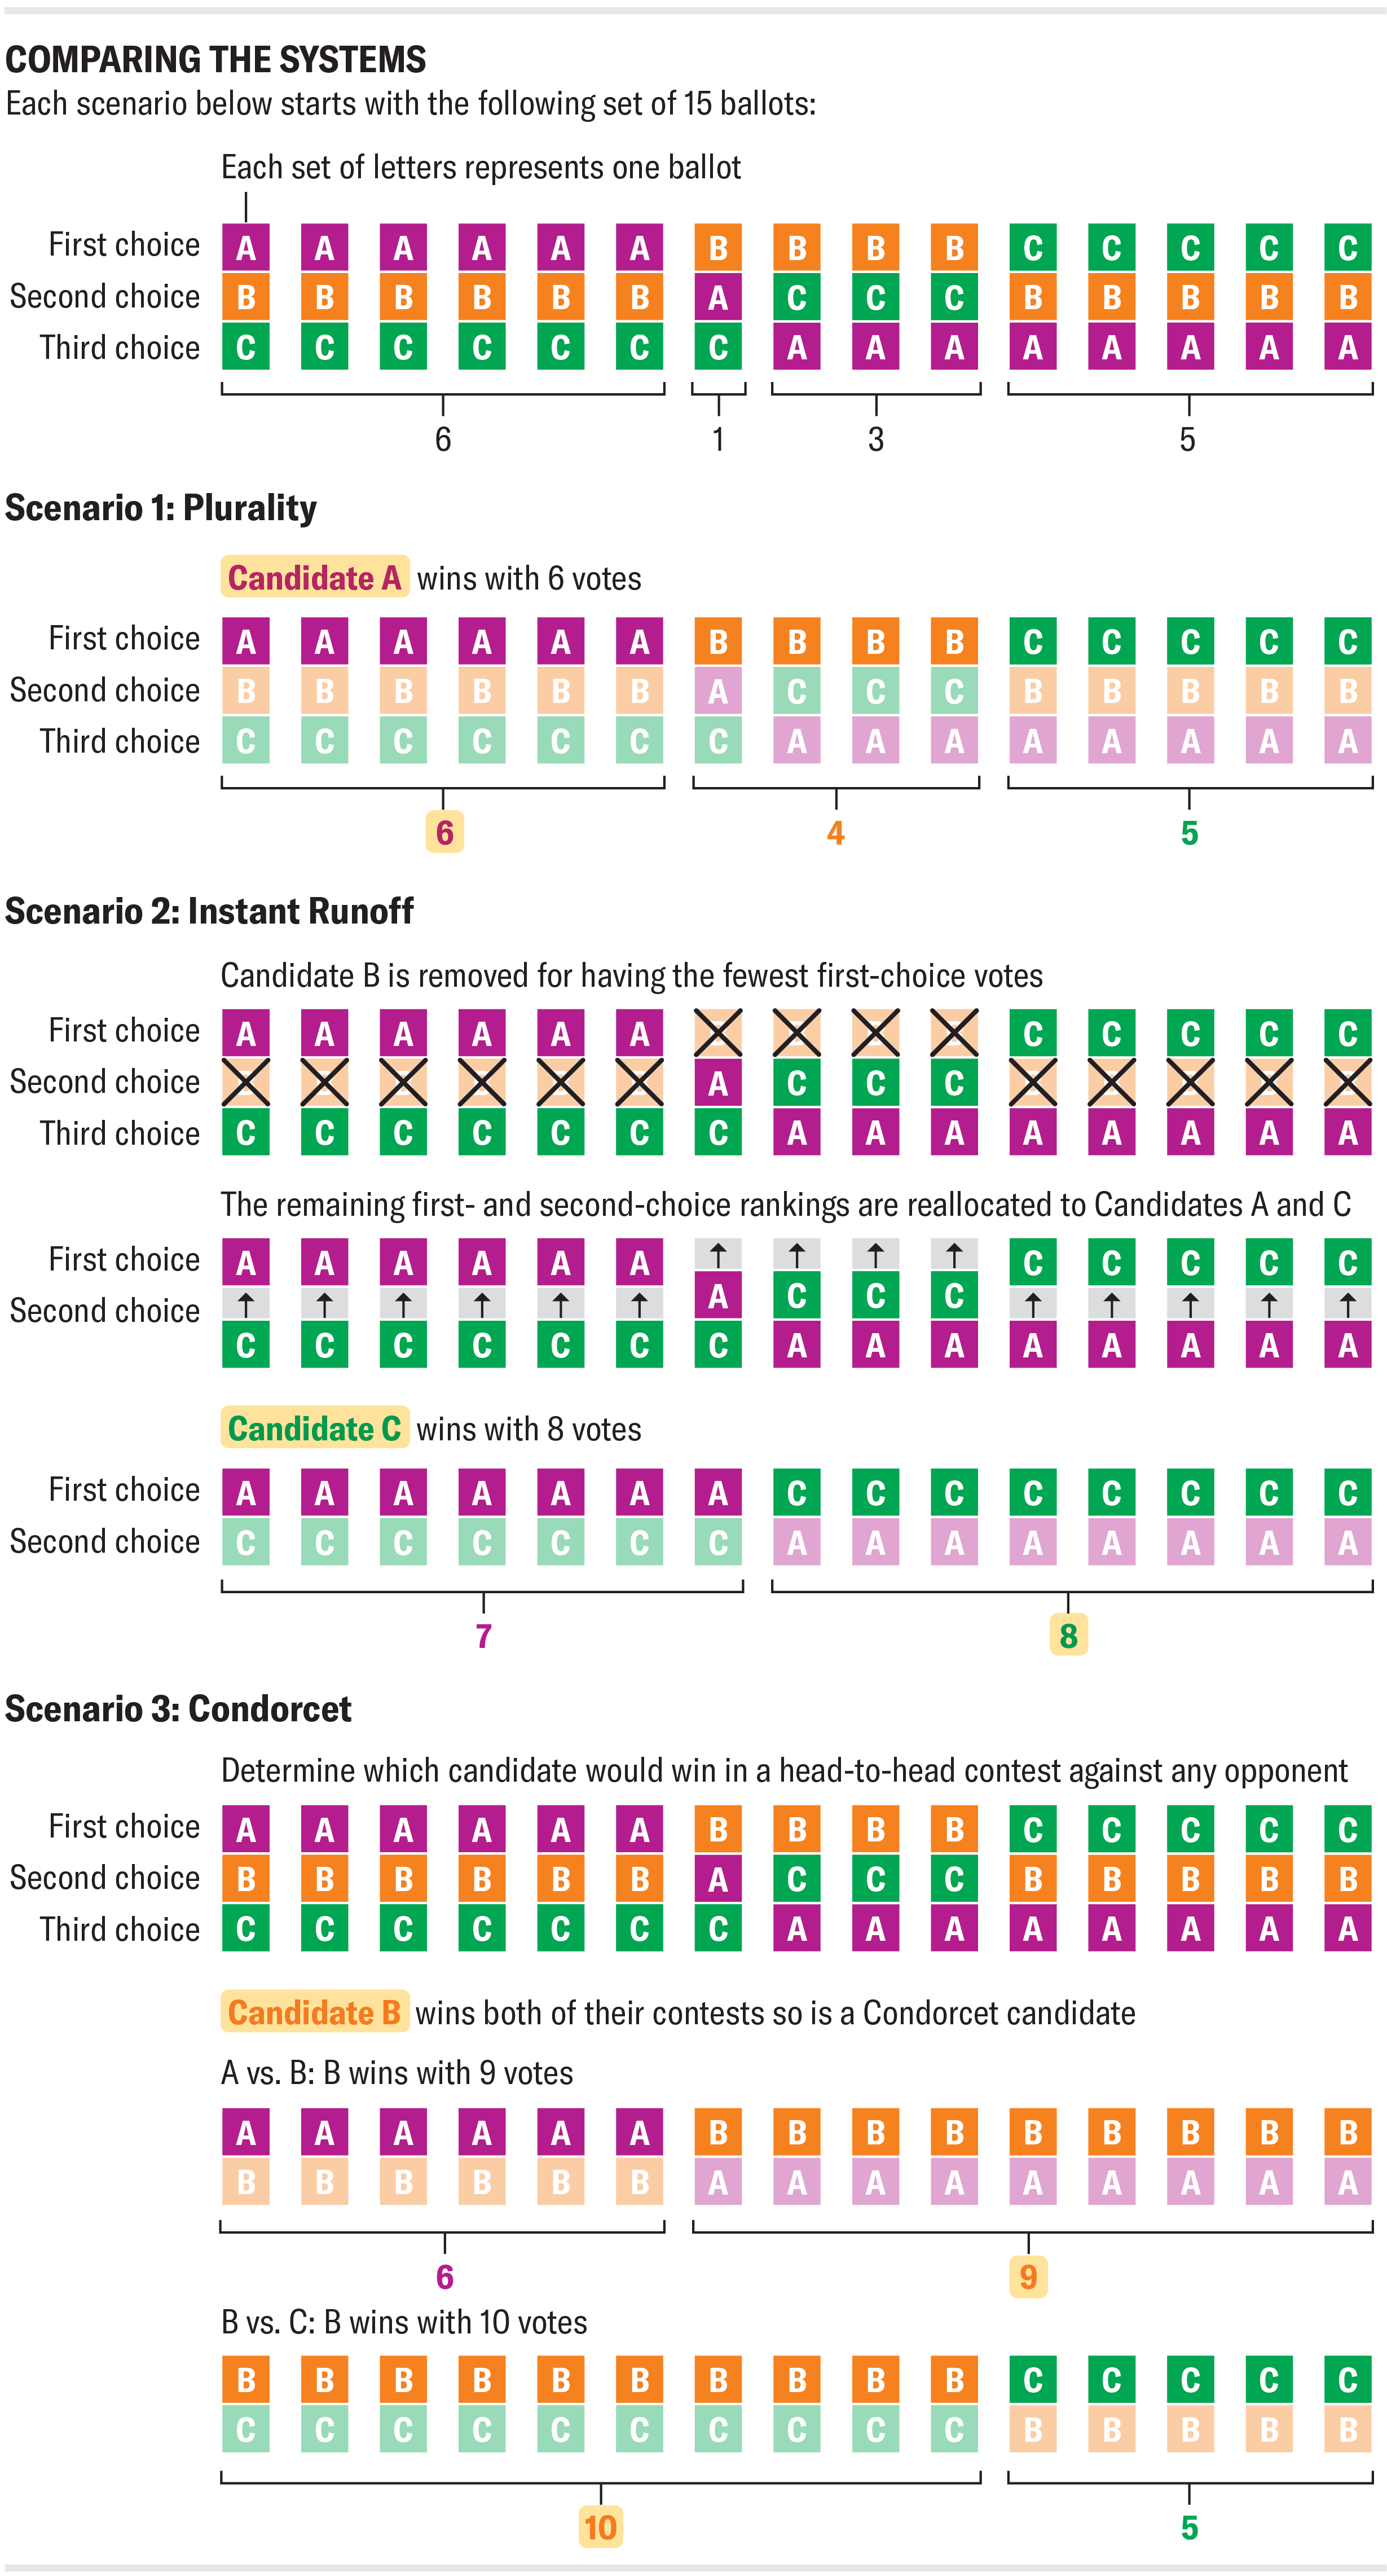 Graphic shows plurality, instant runoff and Condorcet voting system scenarios, all starting with the same set of ballots but ending with different winners.